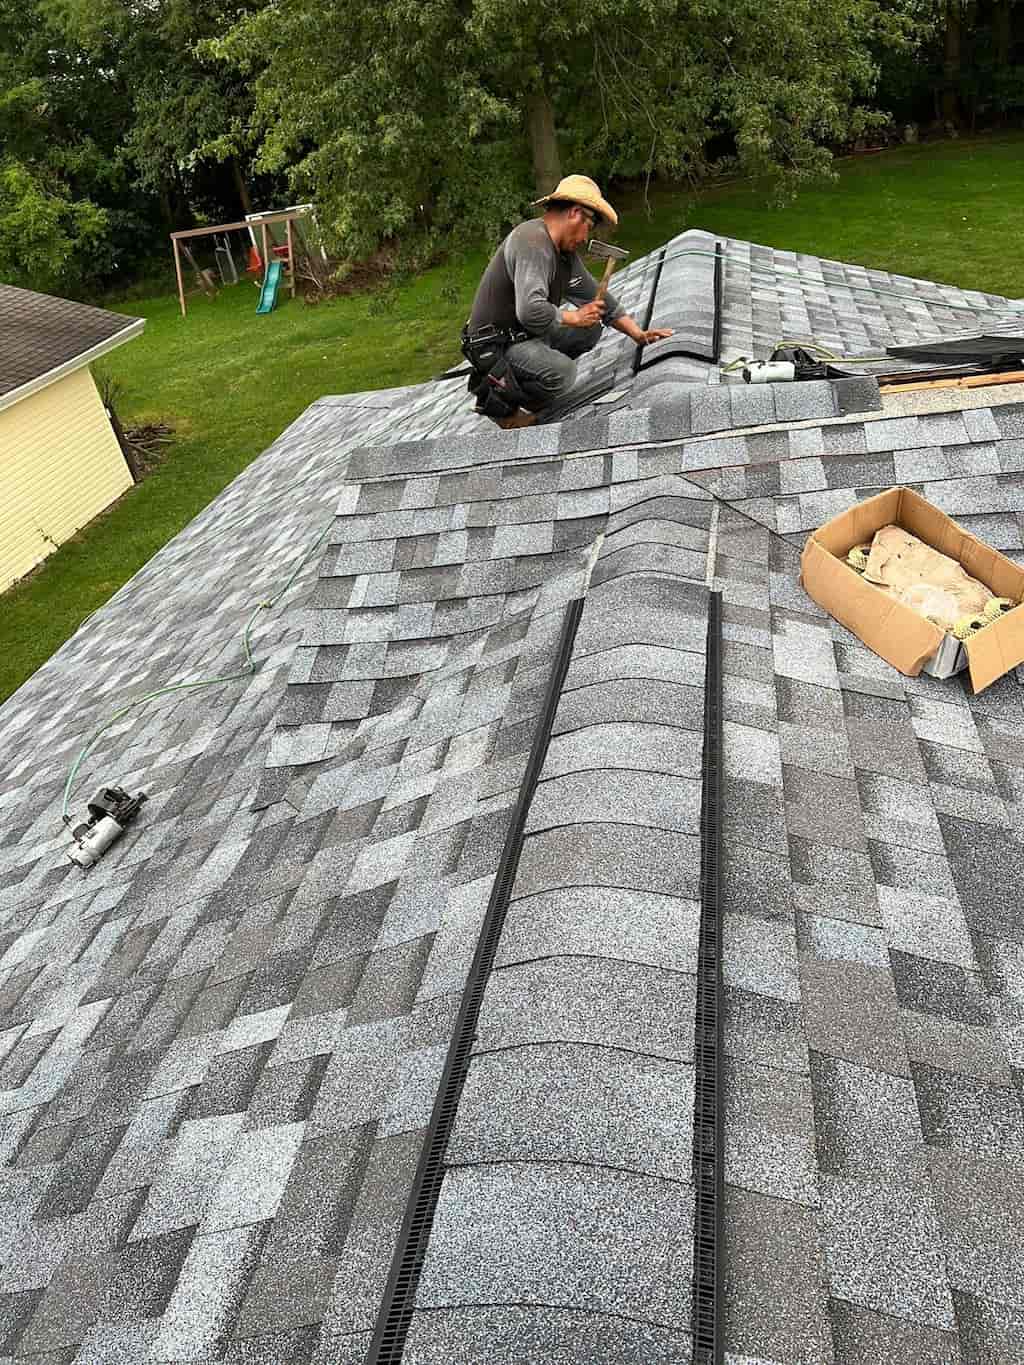 A man performing work by installing shingle on a roof.